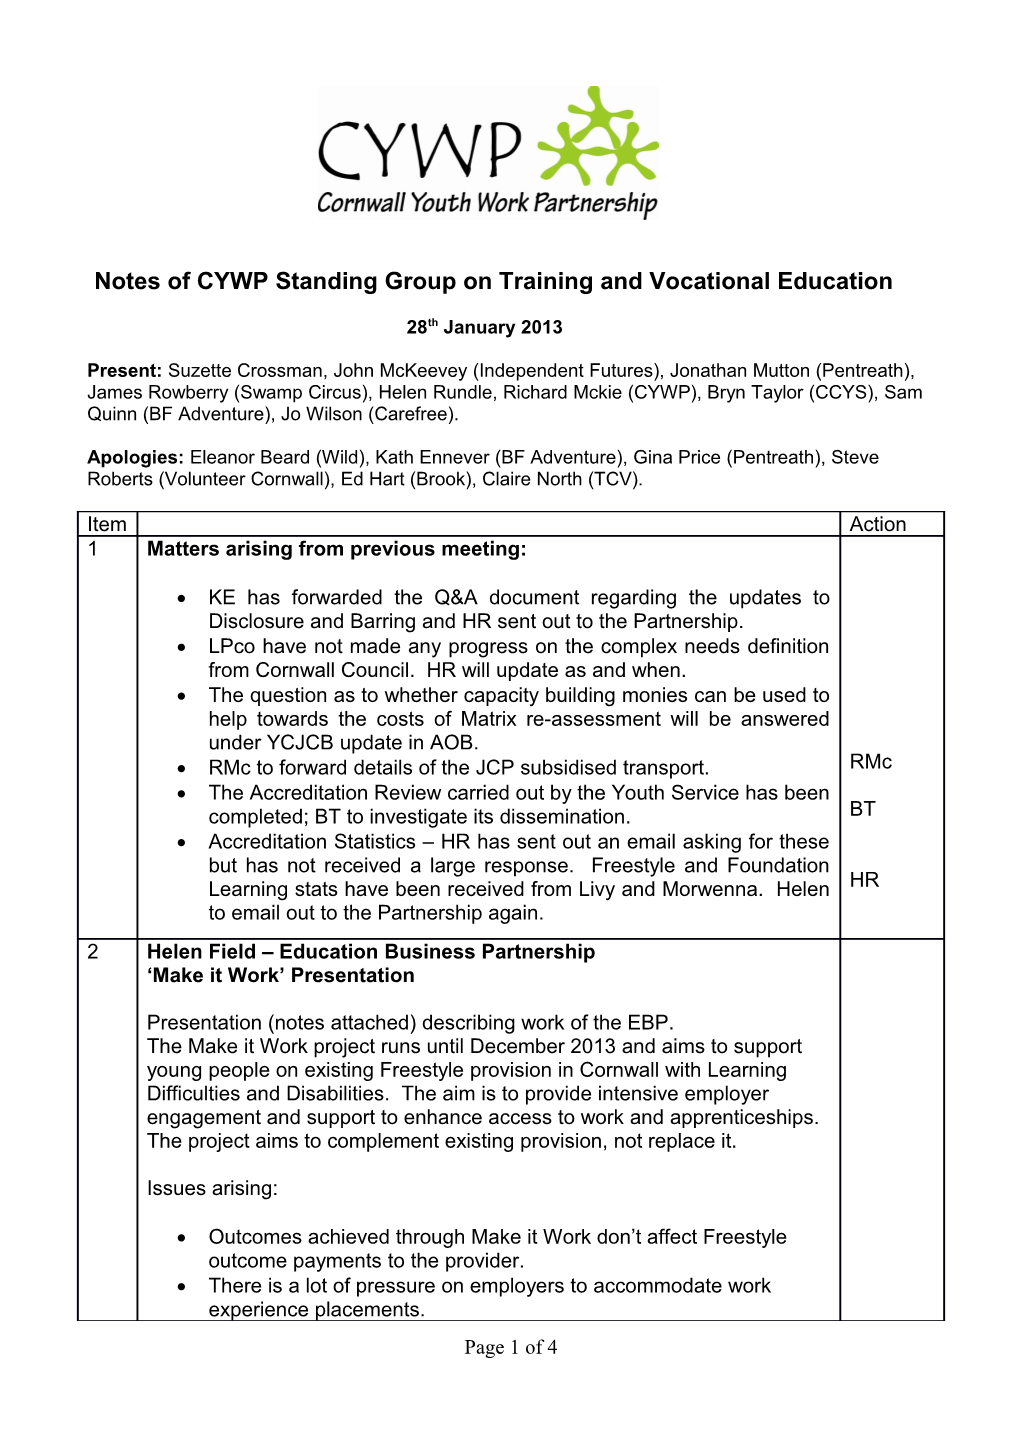 Notes of CYWP Standing Group on Training and Vocational Education